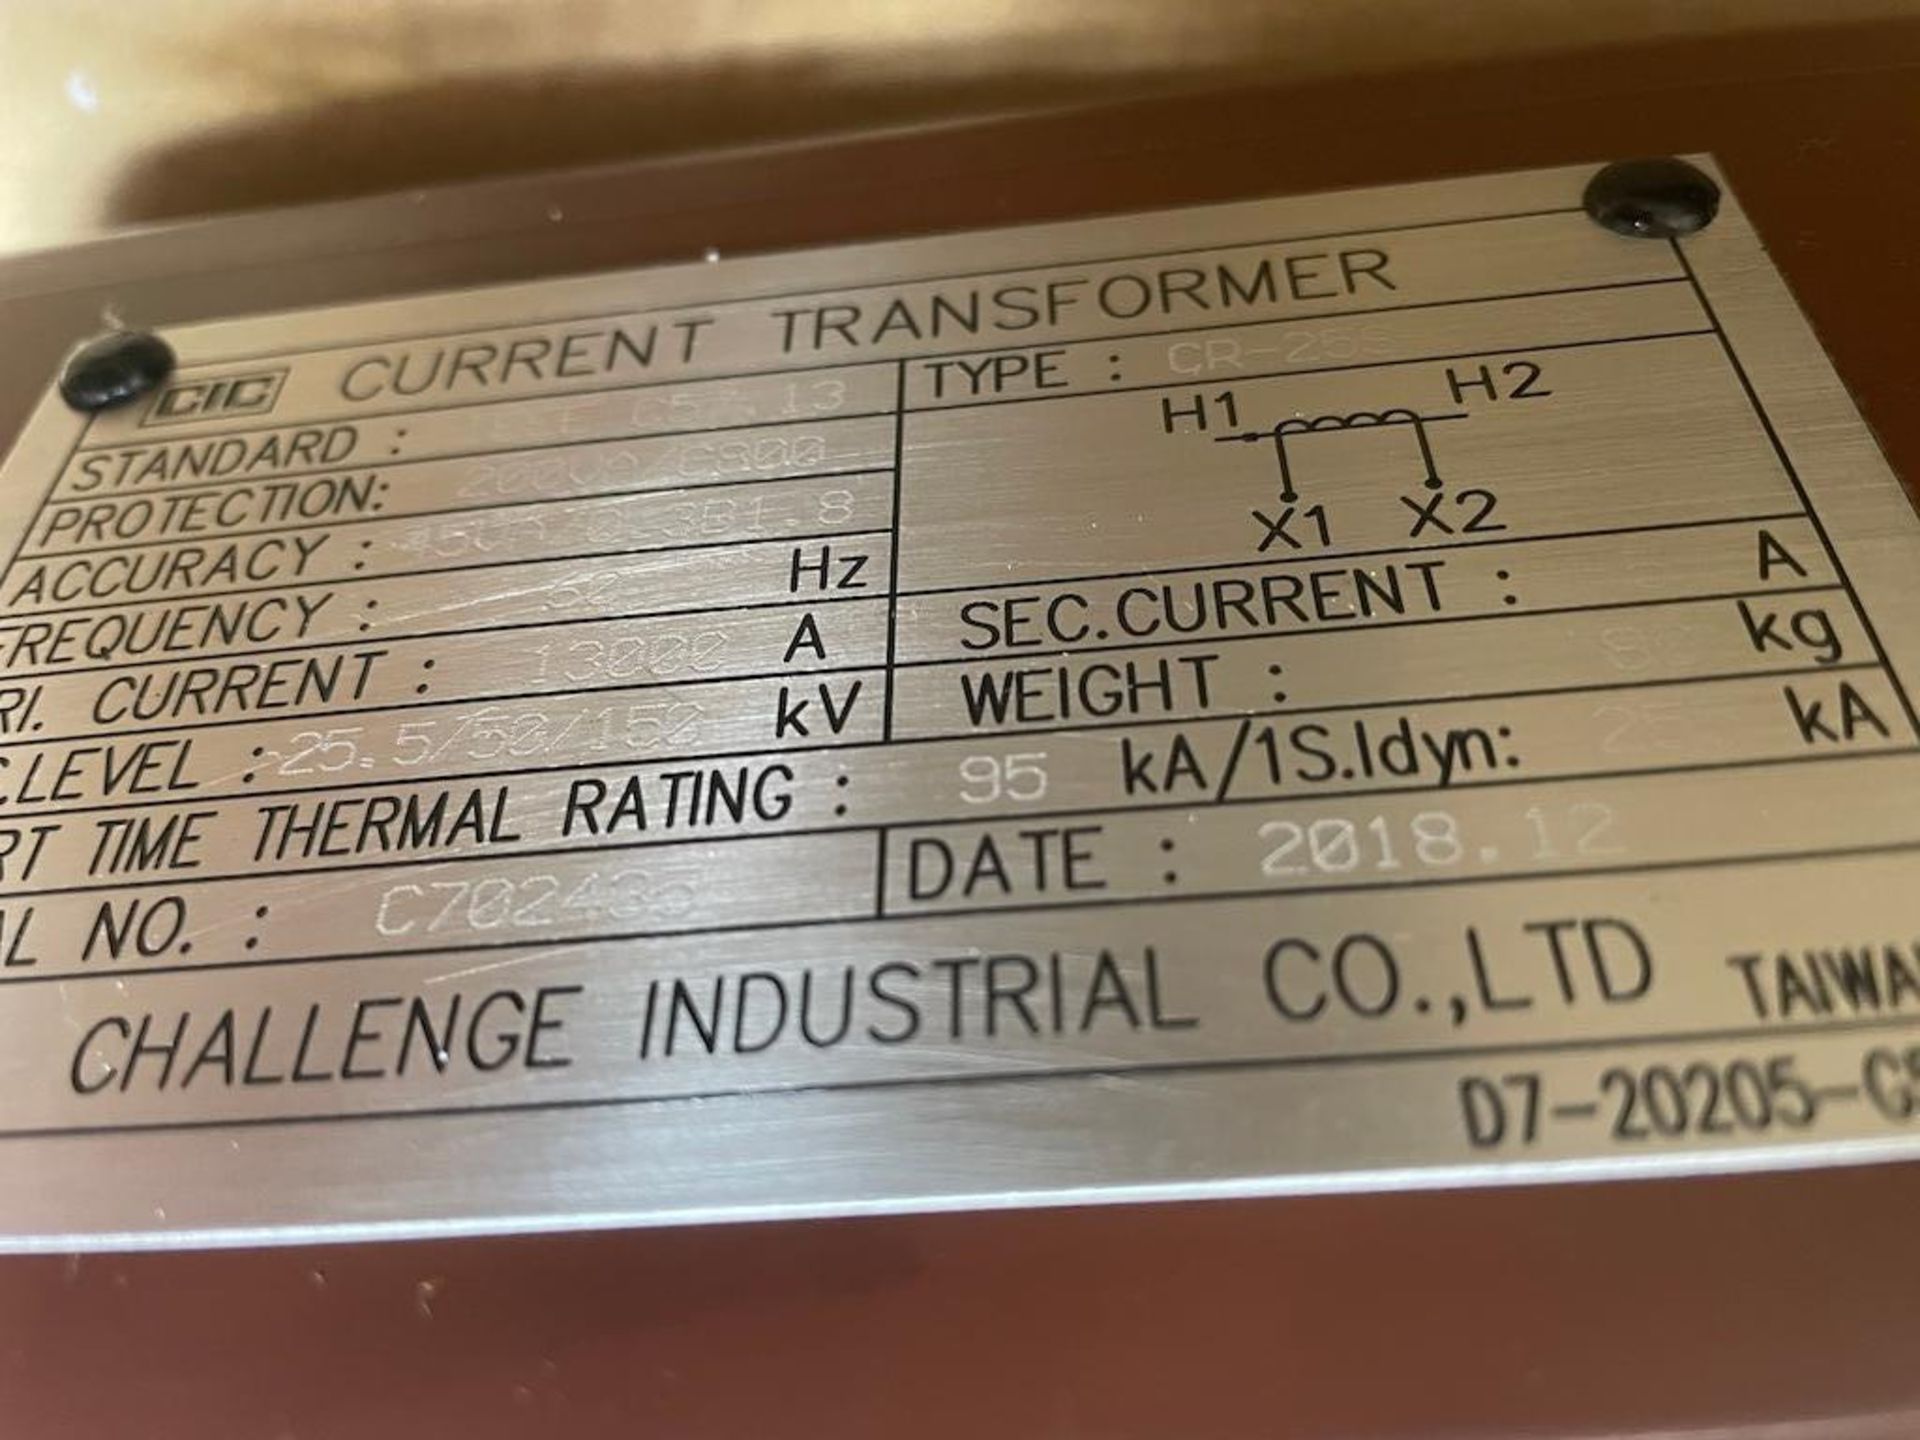 LOT (46) PCS OF 2018 CHALLENGE INDUSTRIAL CURRENT TRANSFORMERS, TYPE CR-25S-520A, STANDARD 1EEE C57. - Image 7 of 7